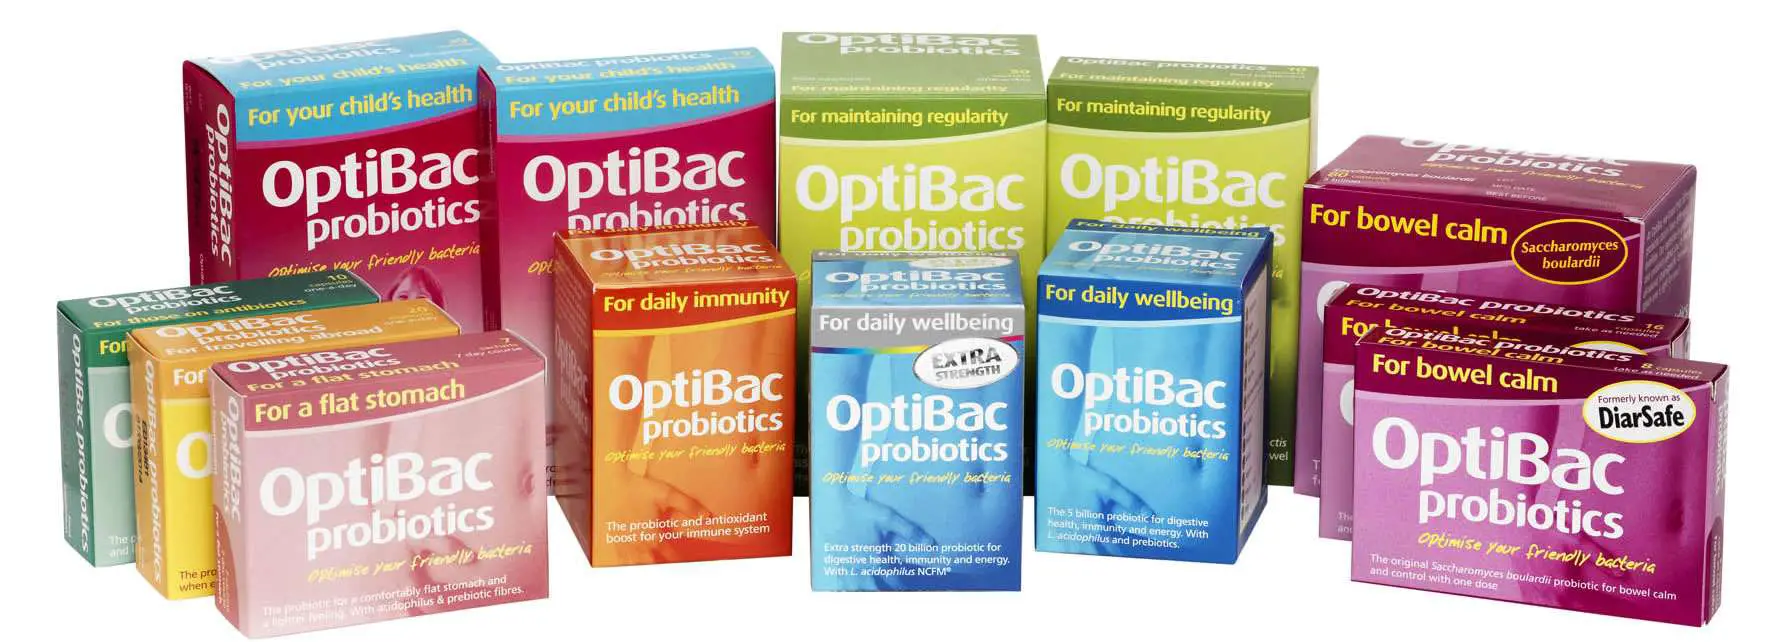 Great natural live cultures from OptiBac Probiotics  Imperfectly Natural